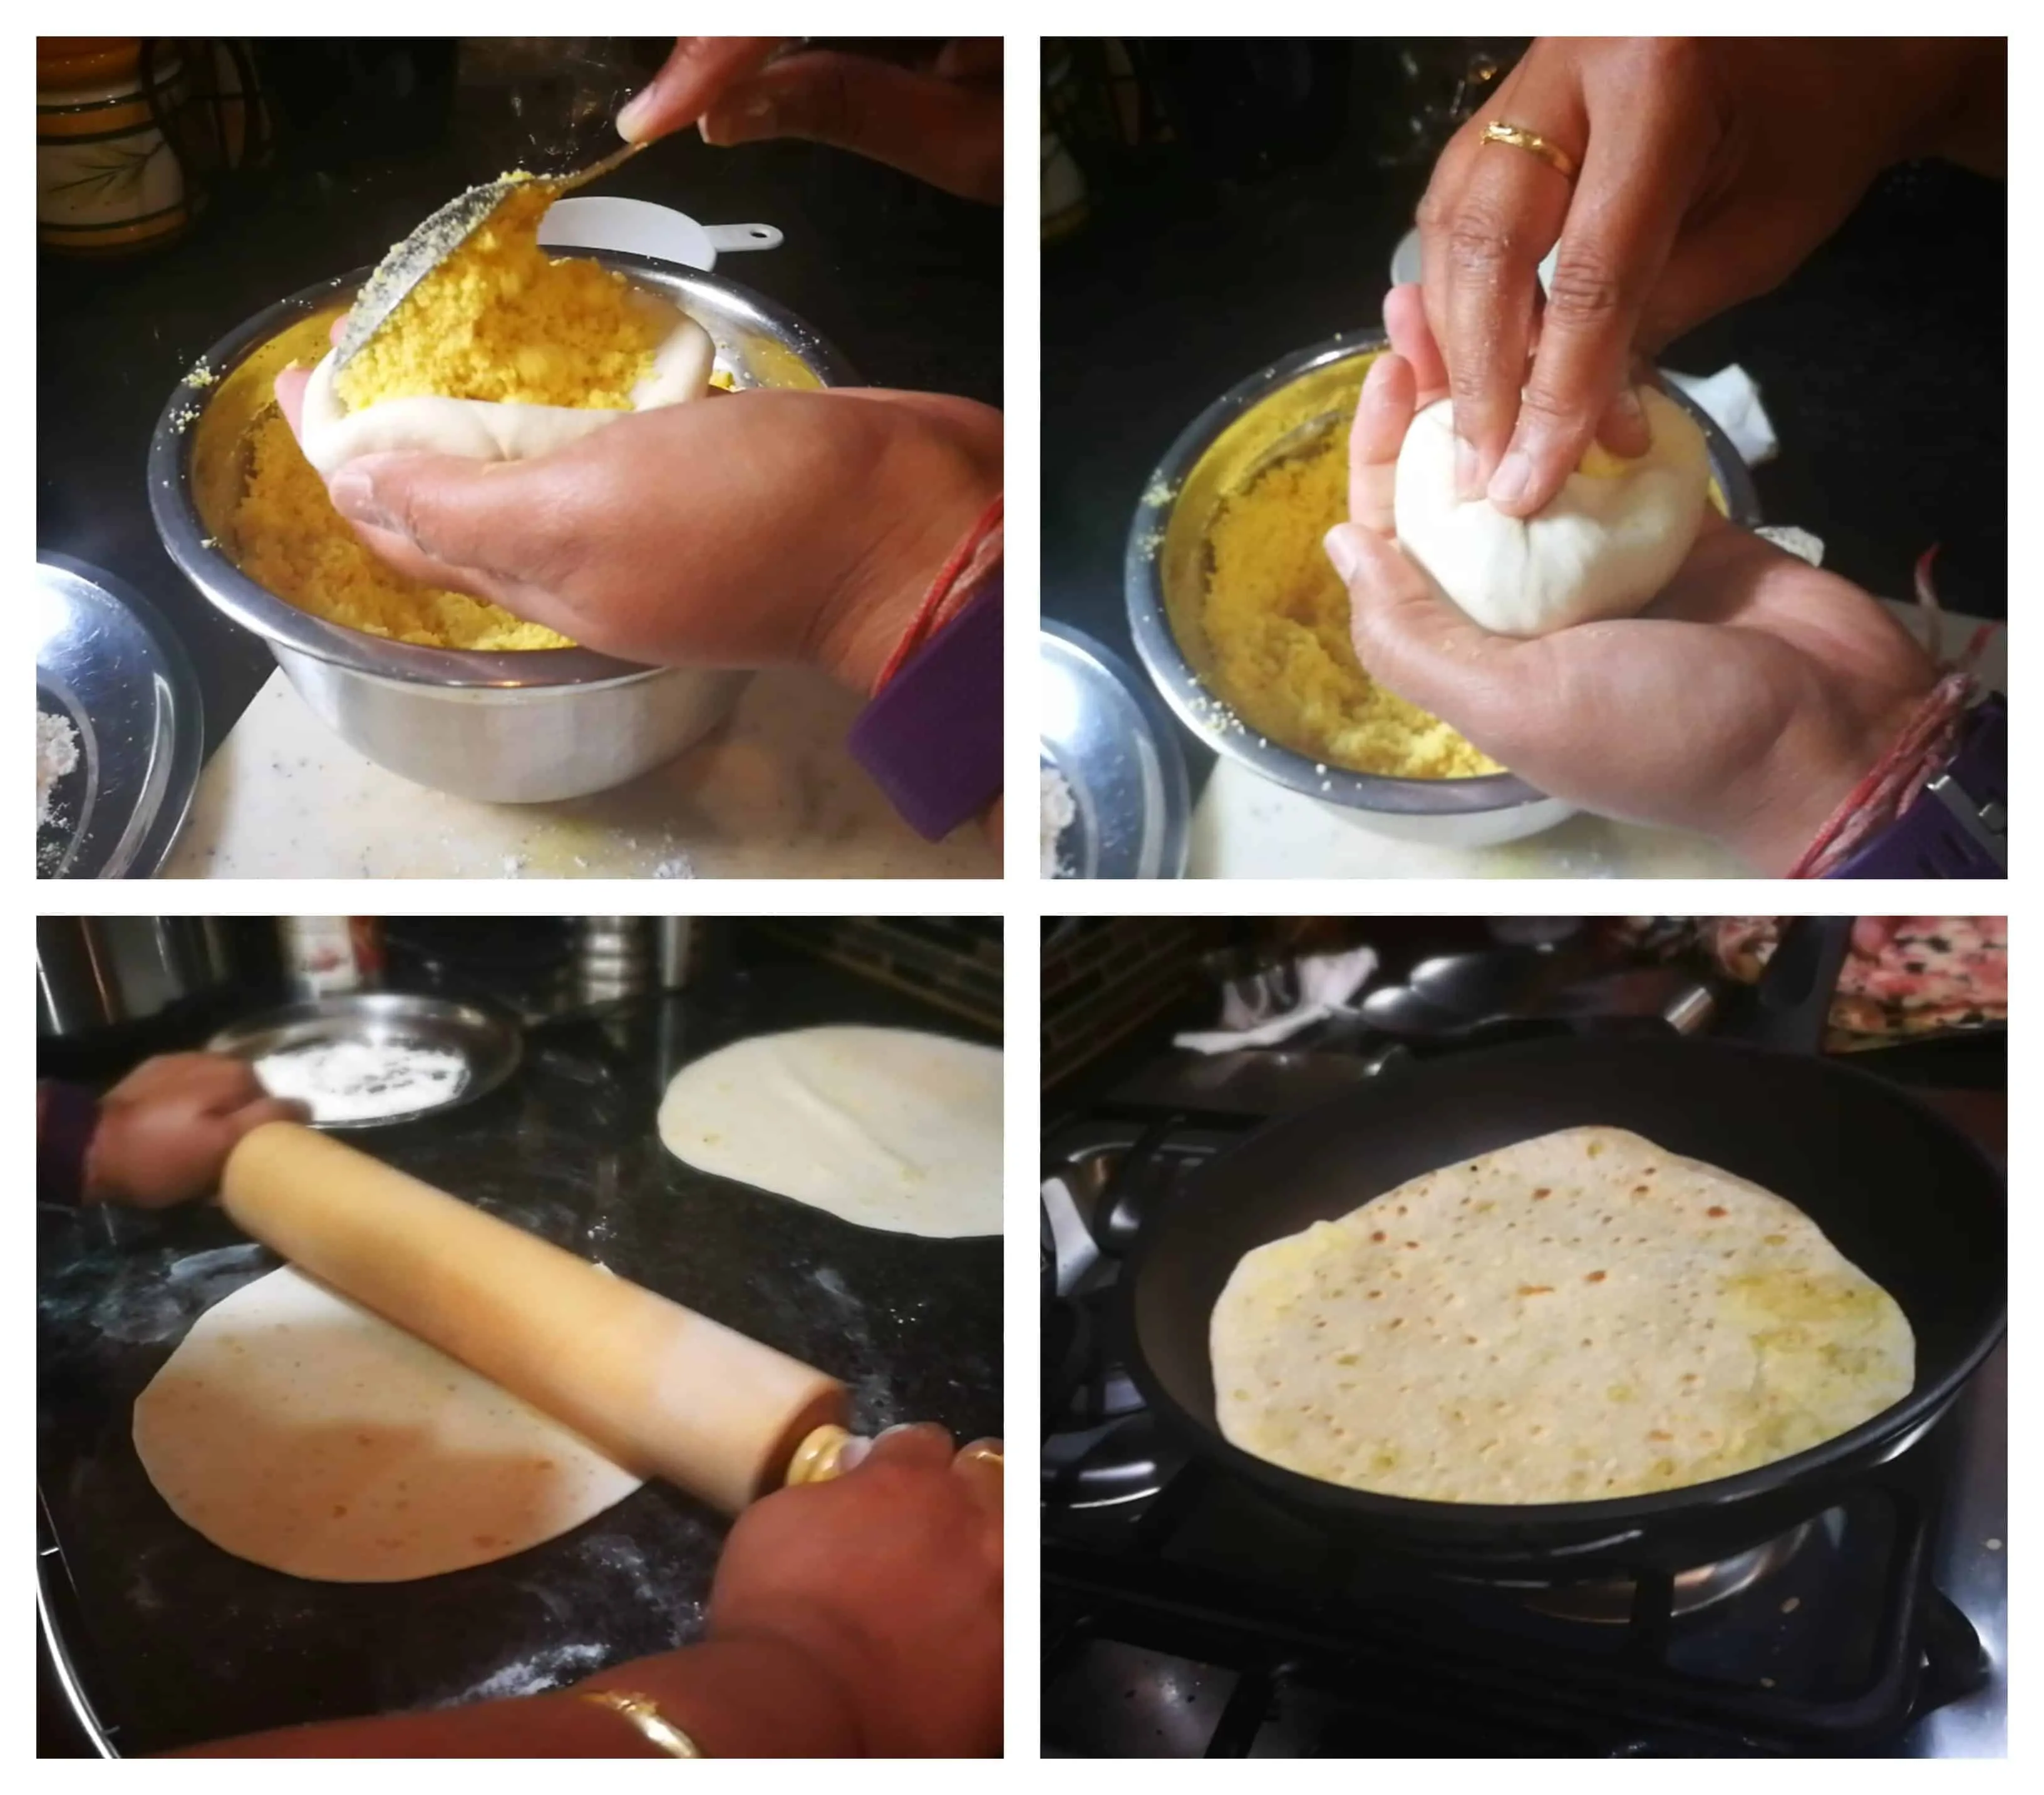 Shaping and cooking the dough